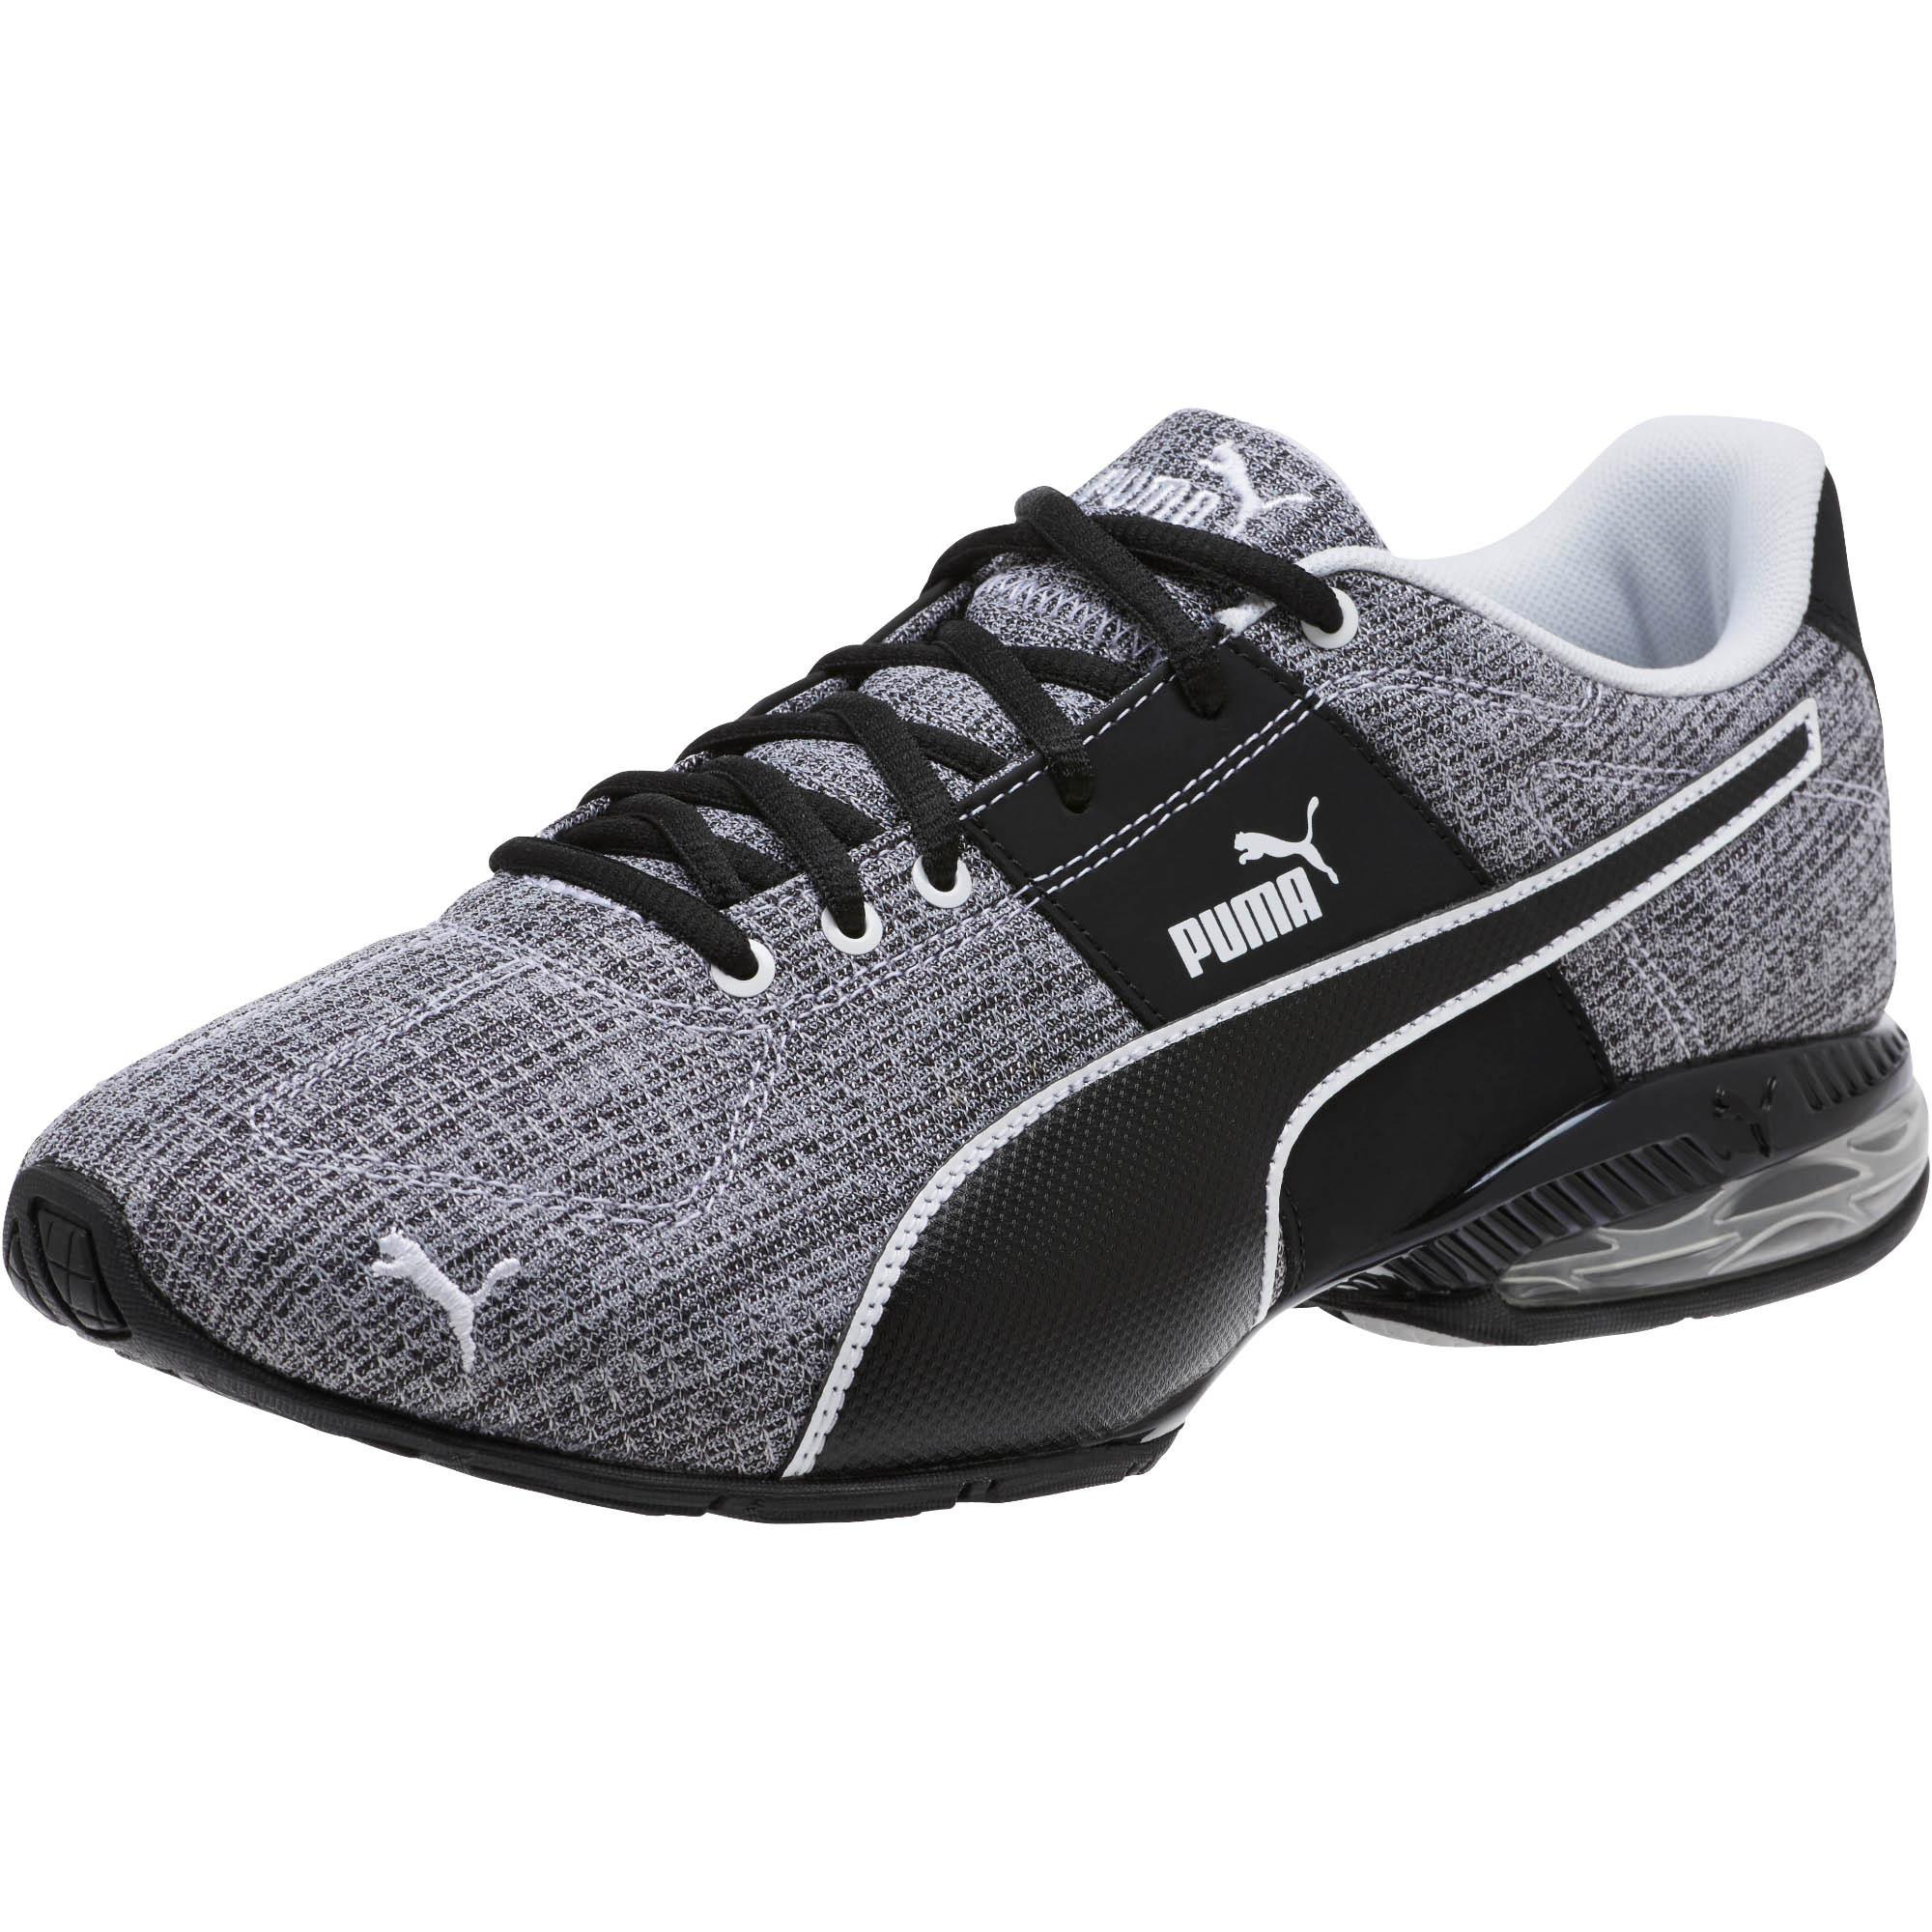 PUMA Lace Cell Surin 2 Heather Men's Running Shoes in 03 (Black) for ...